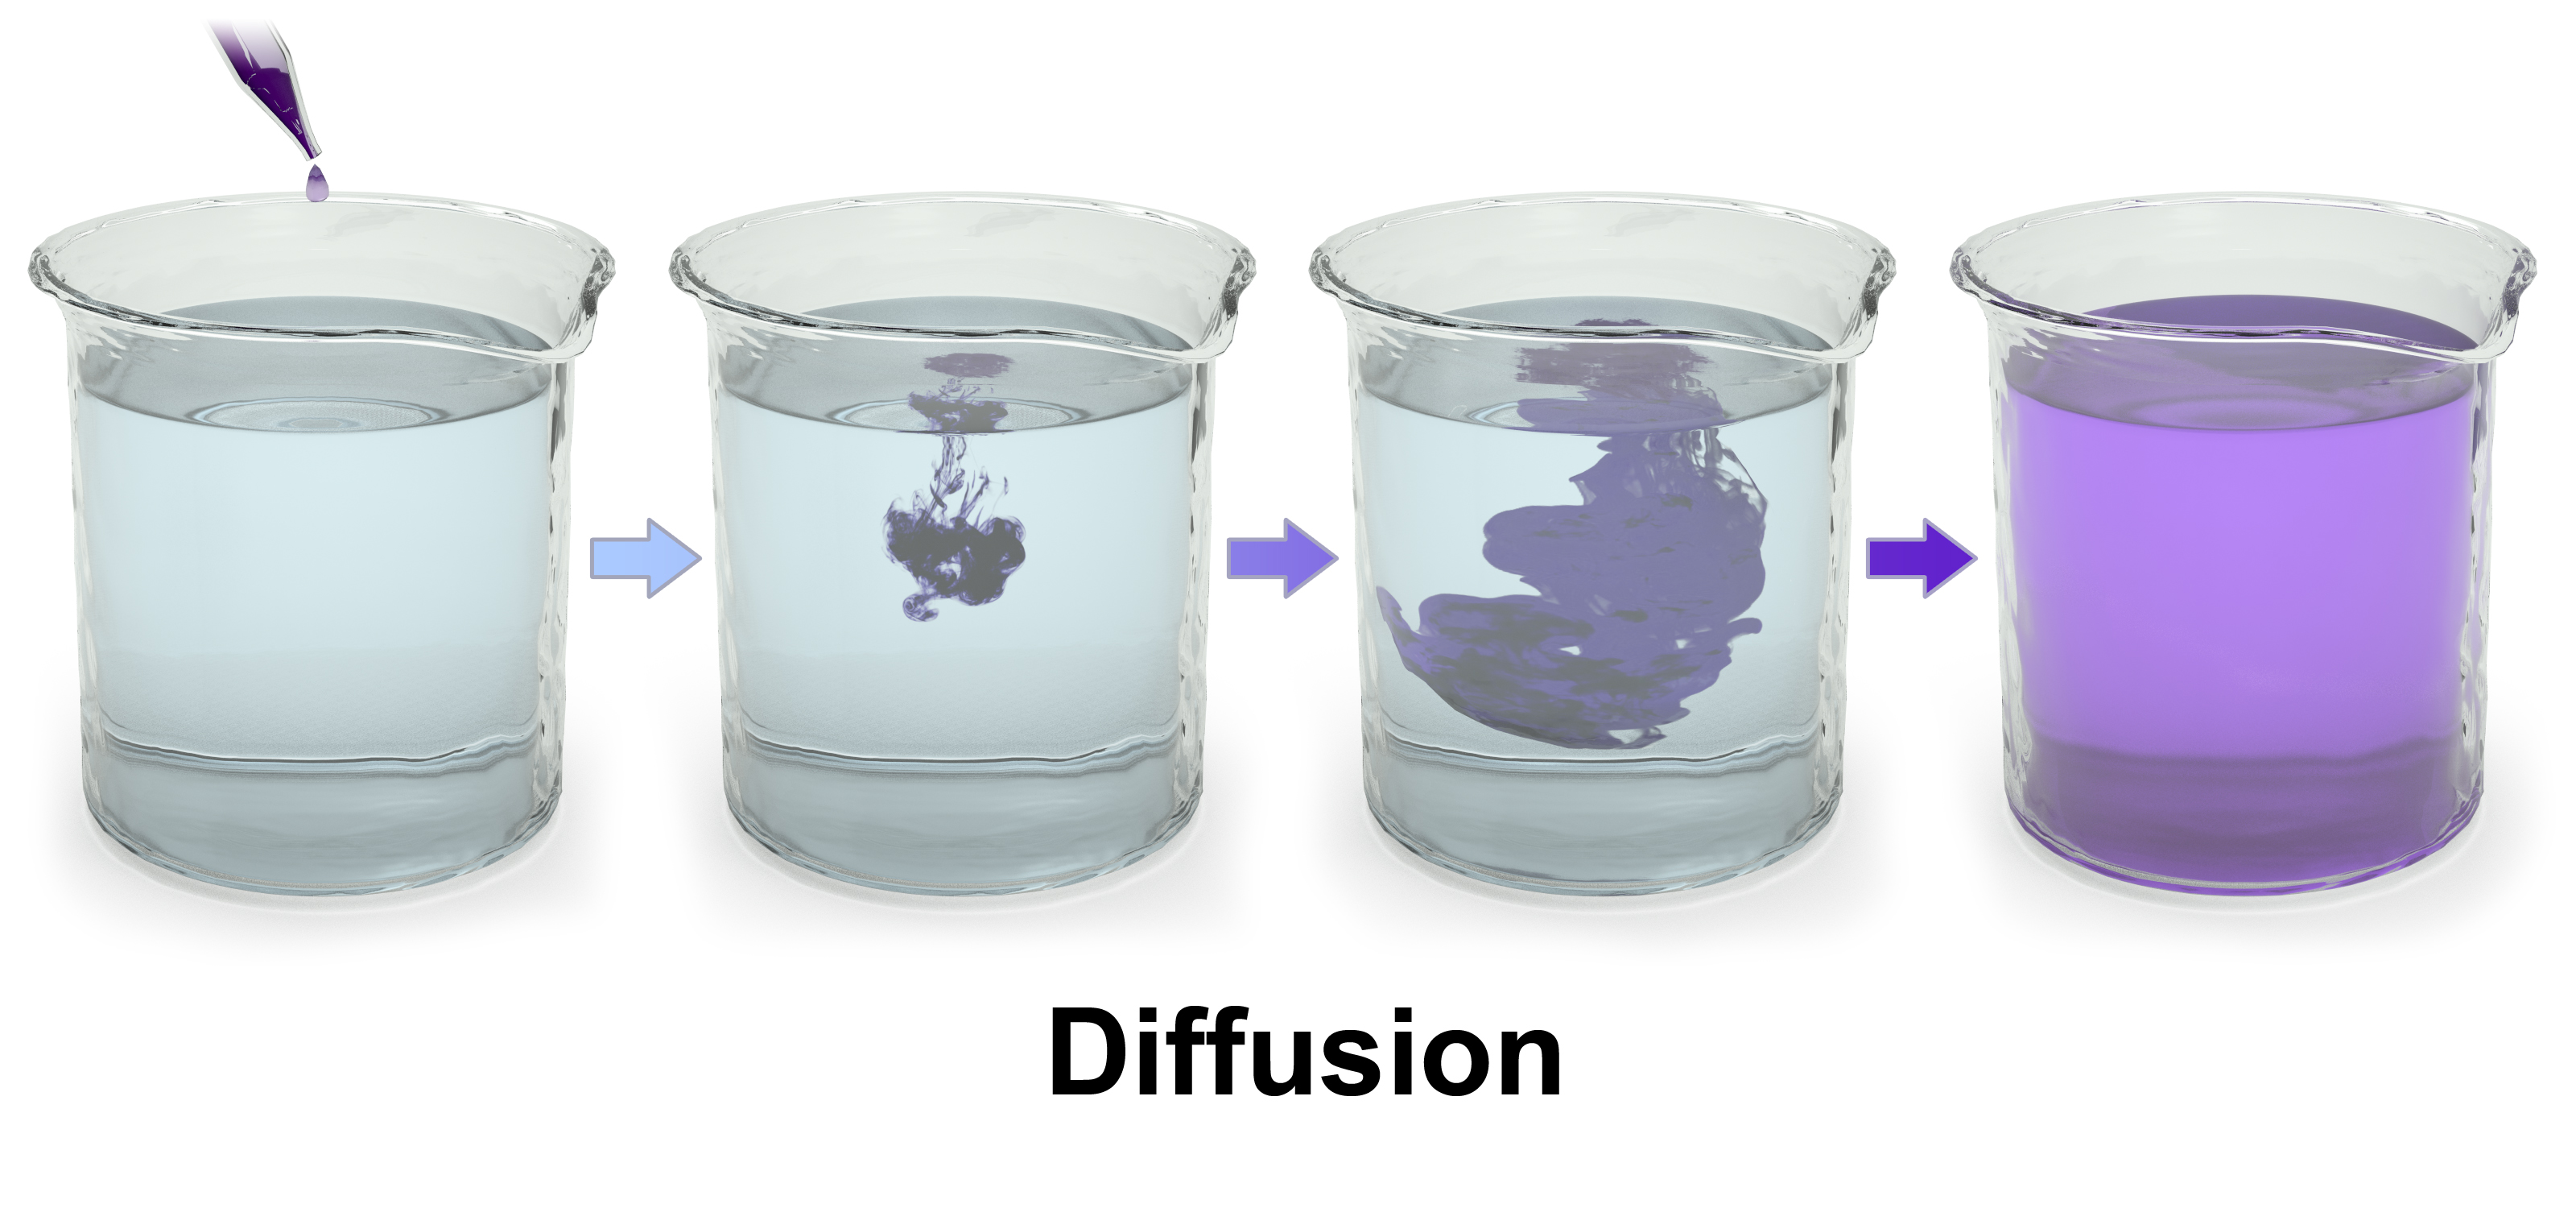 Diffusion of a purple dye in water.